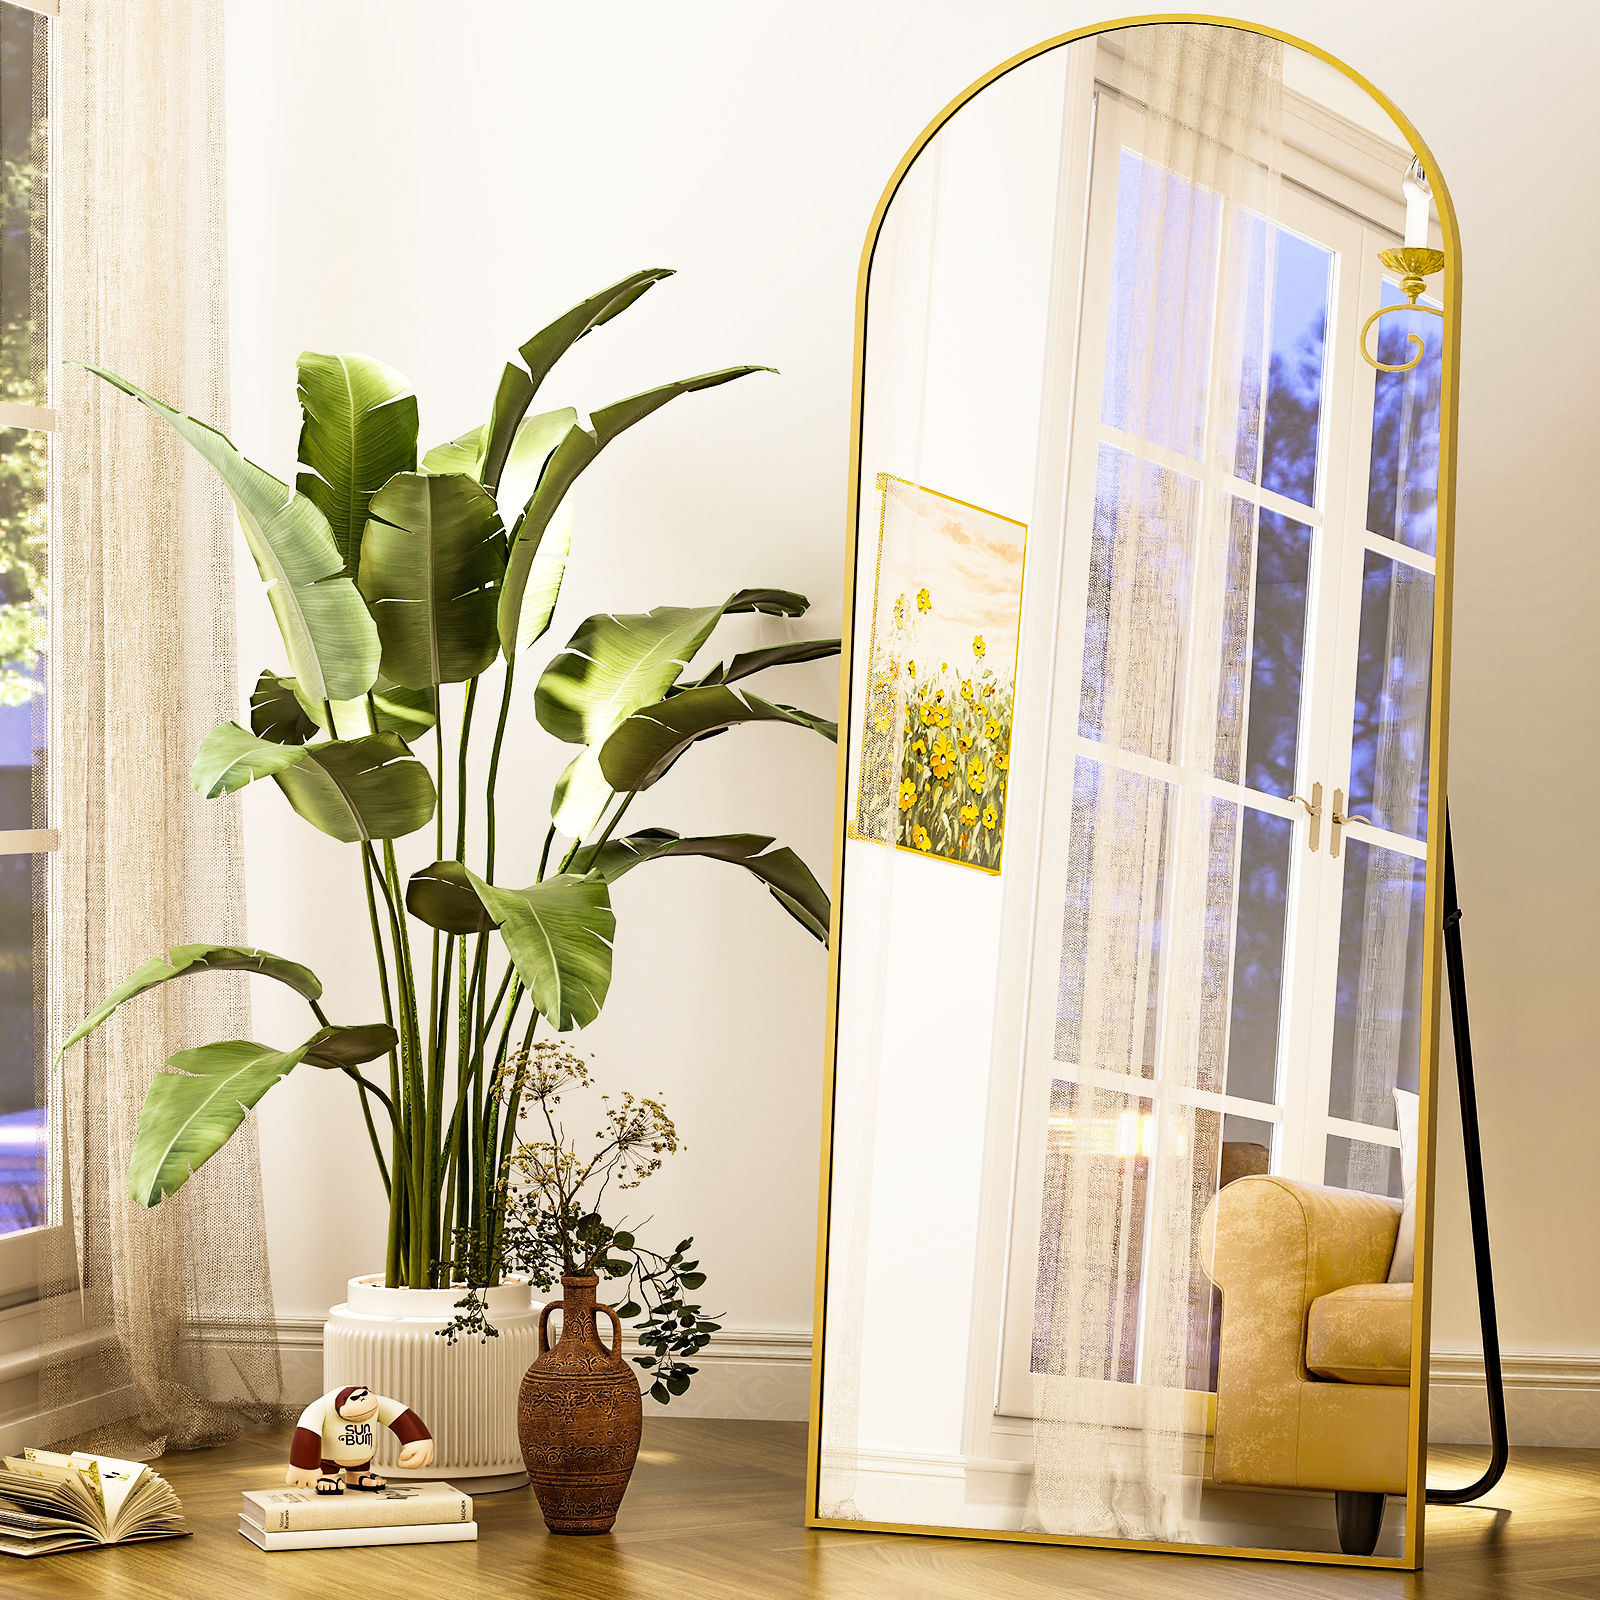 BEAUTYPEAK Arched Full Length Floor Mirror 64"x21.1" Full Body Standing Mirror,Gold - image 1 of 14